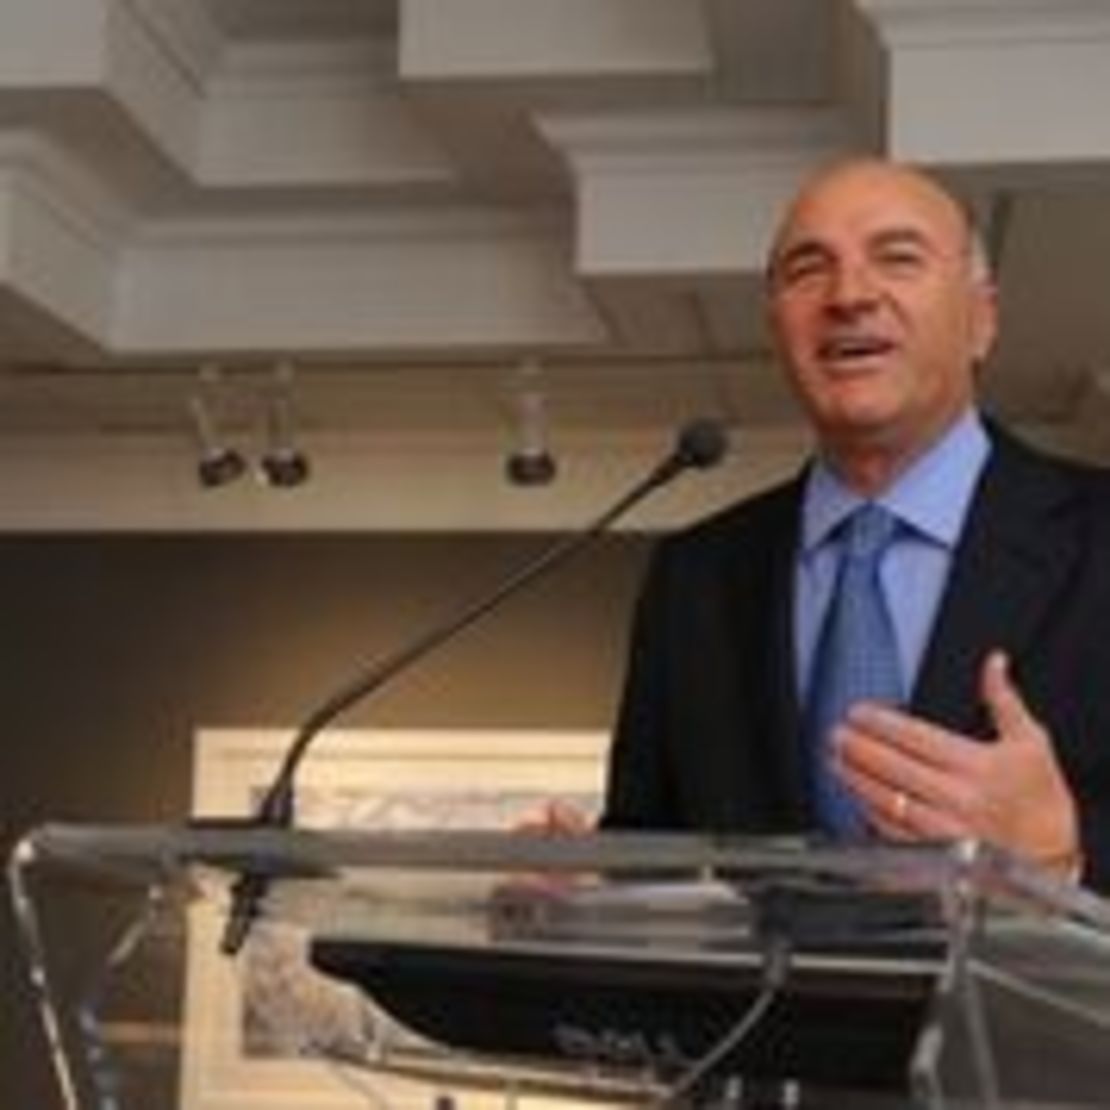 O'Leary is a successful business entrepreneur and star of the ABC TV show "Shark Tank."